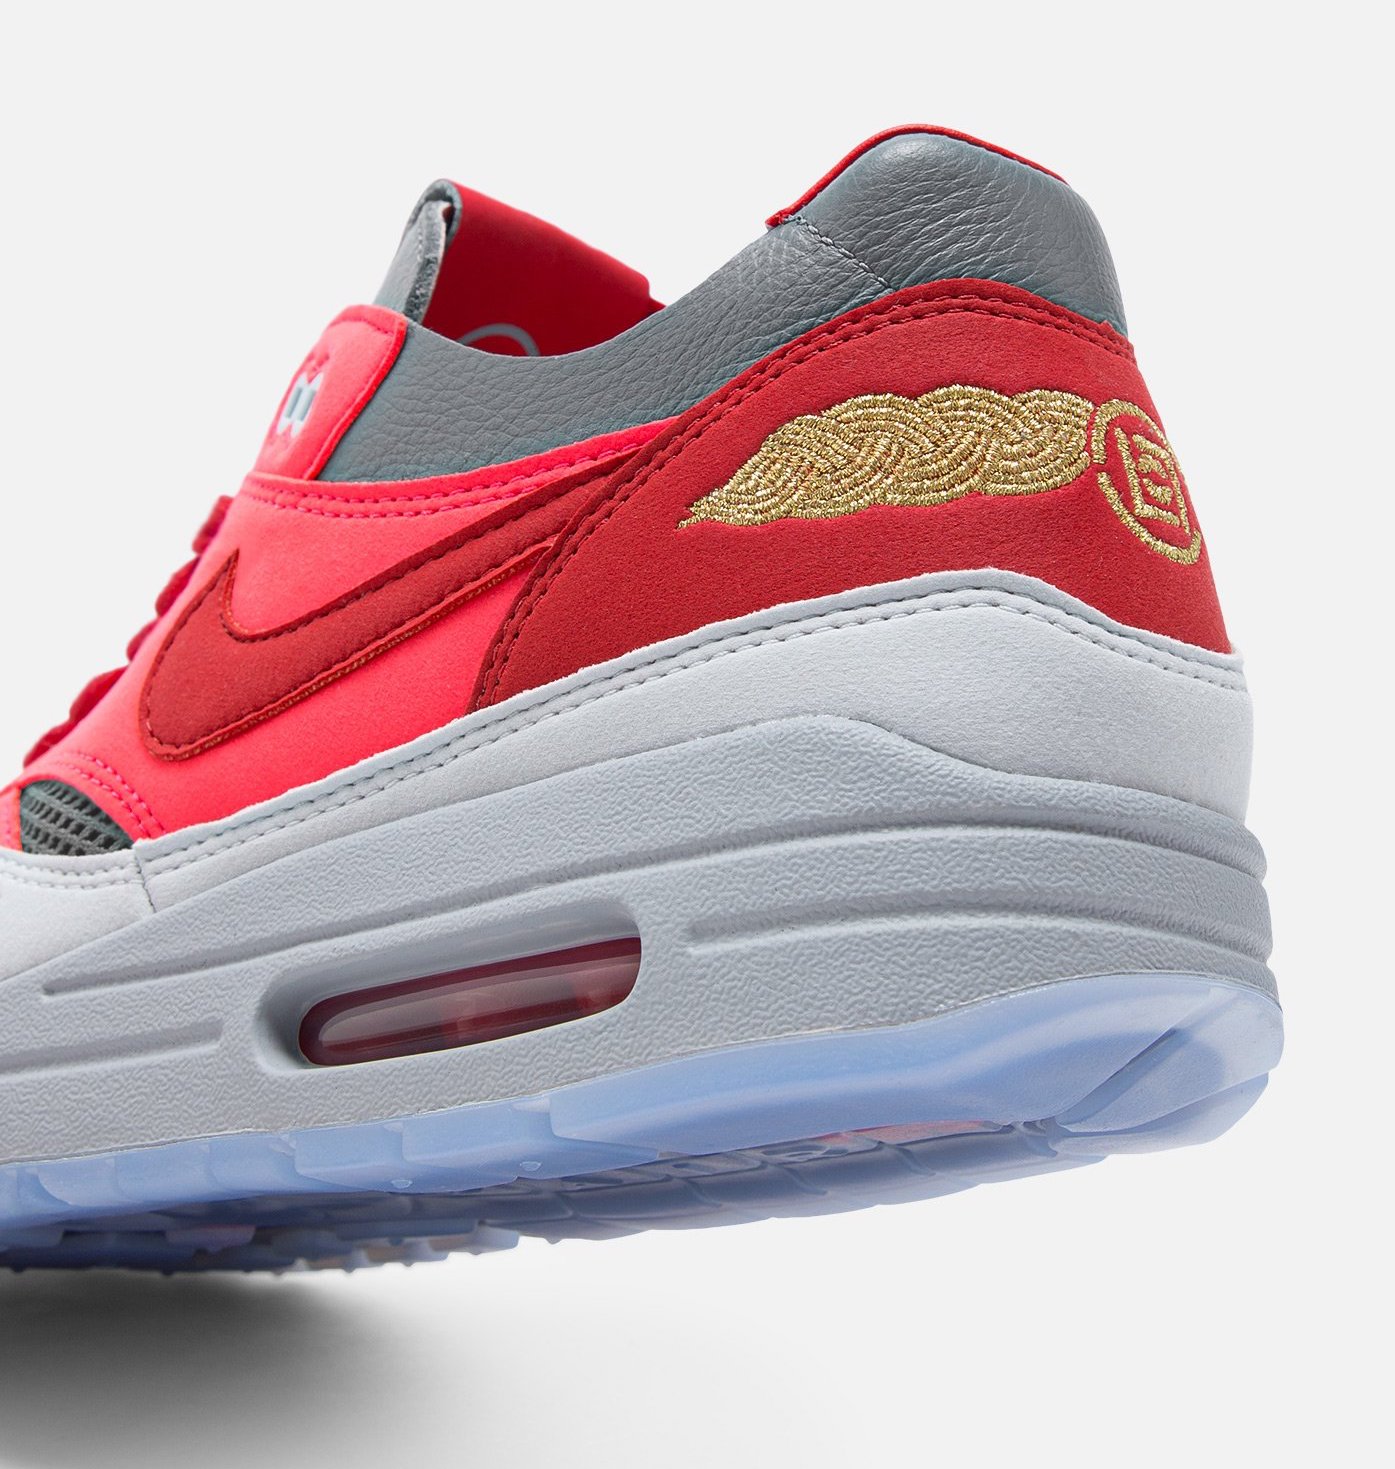 CLOT Nike long-sleeve Air Max 1 KOD Solar Red DD1870-600 Release Date